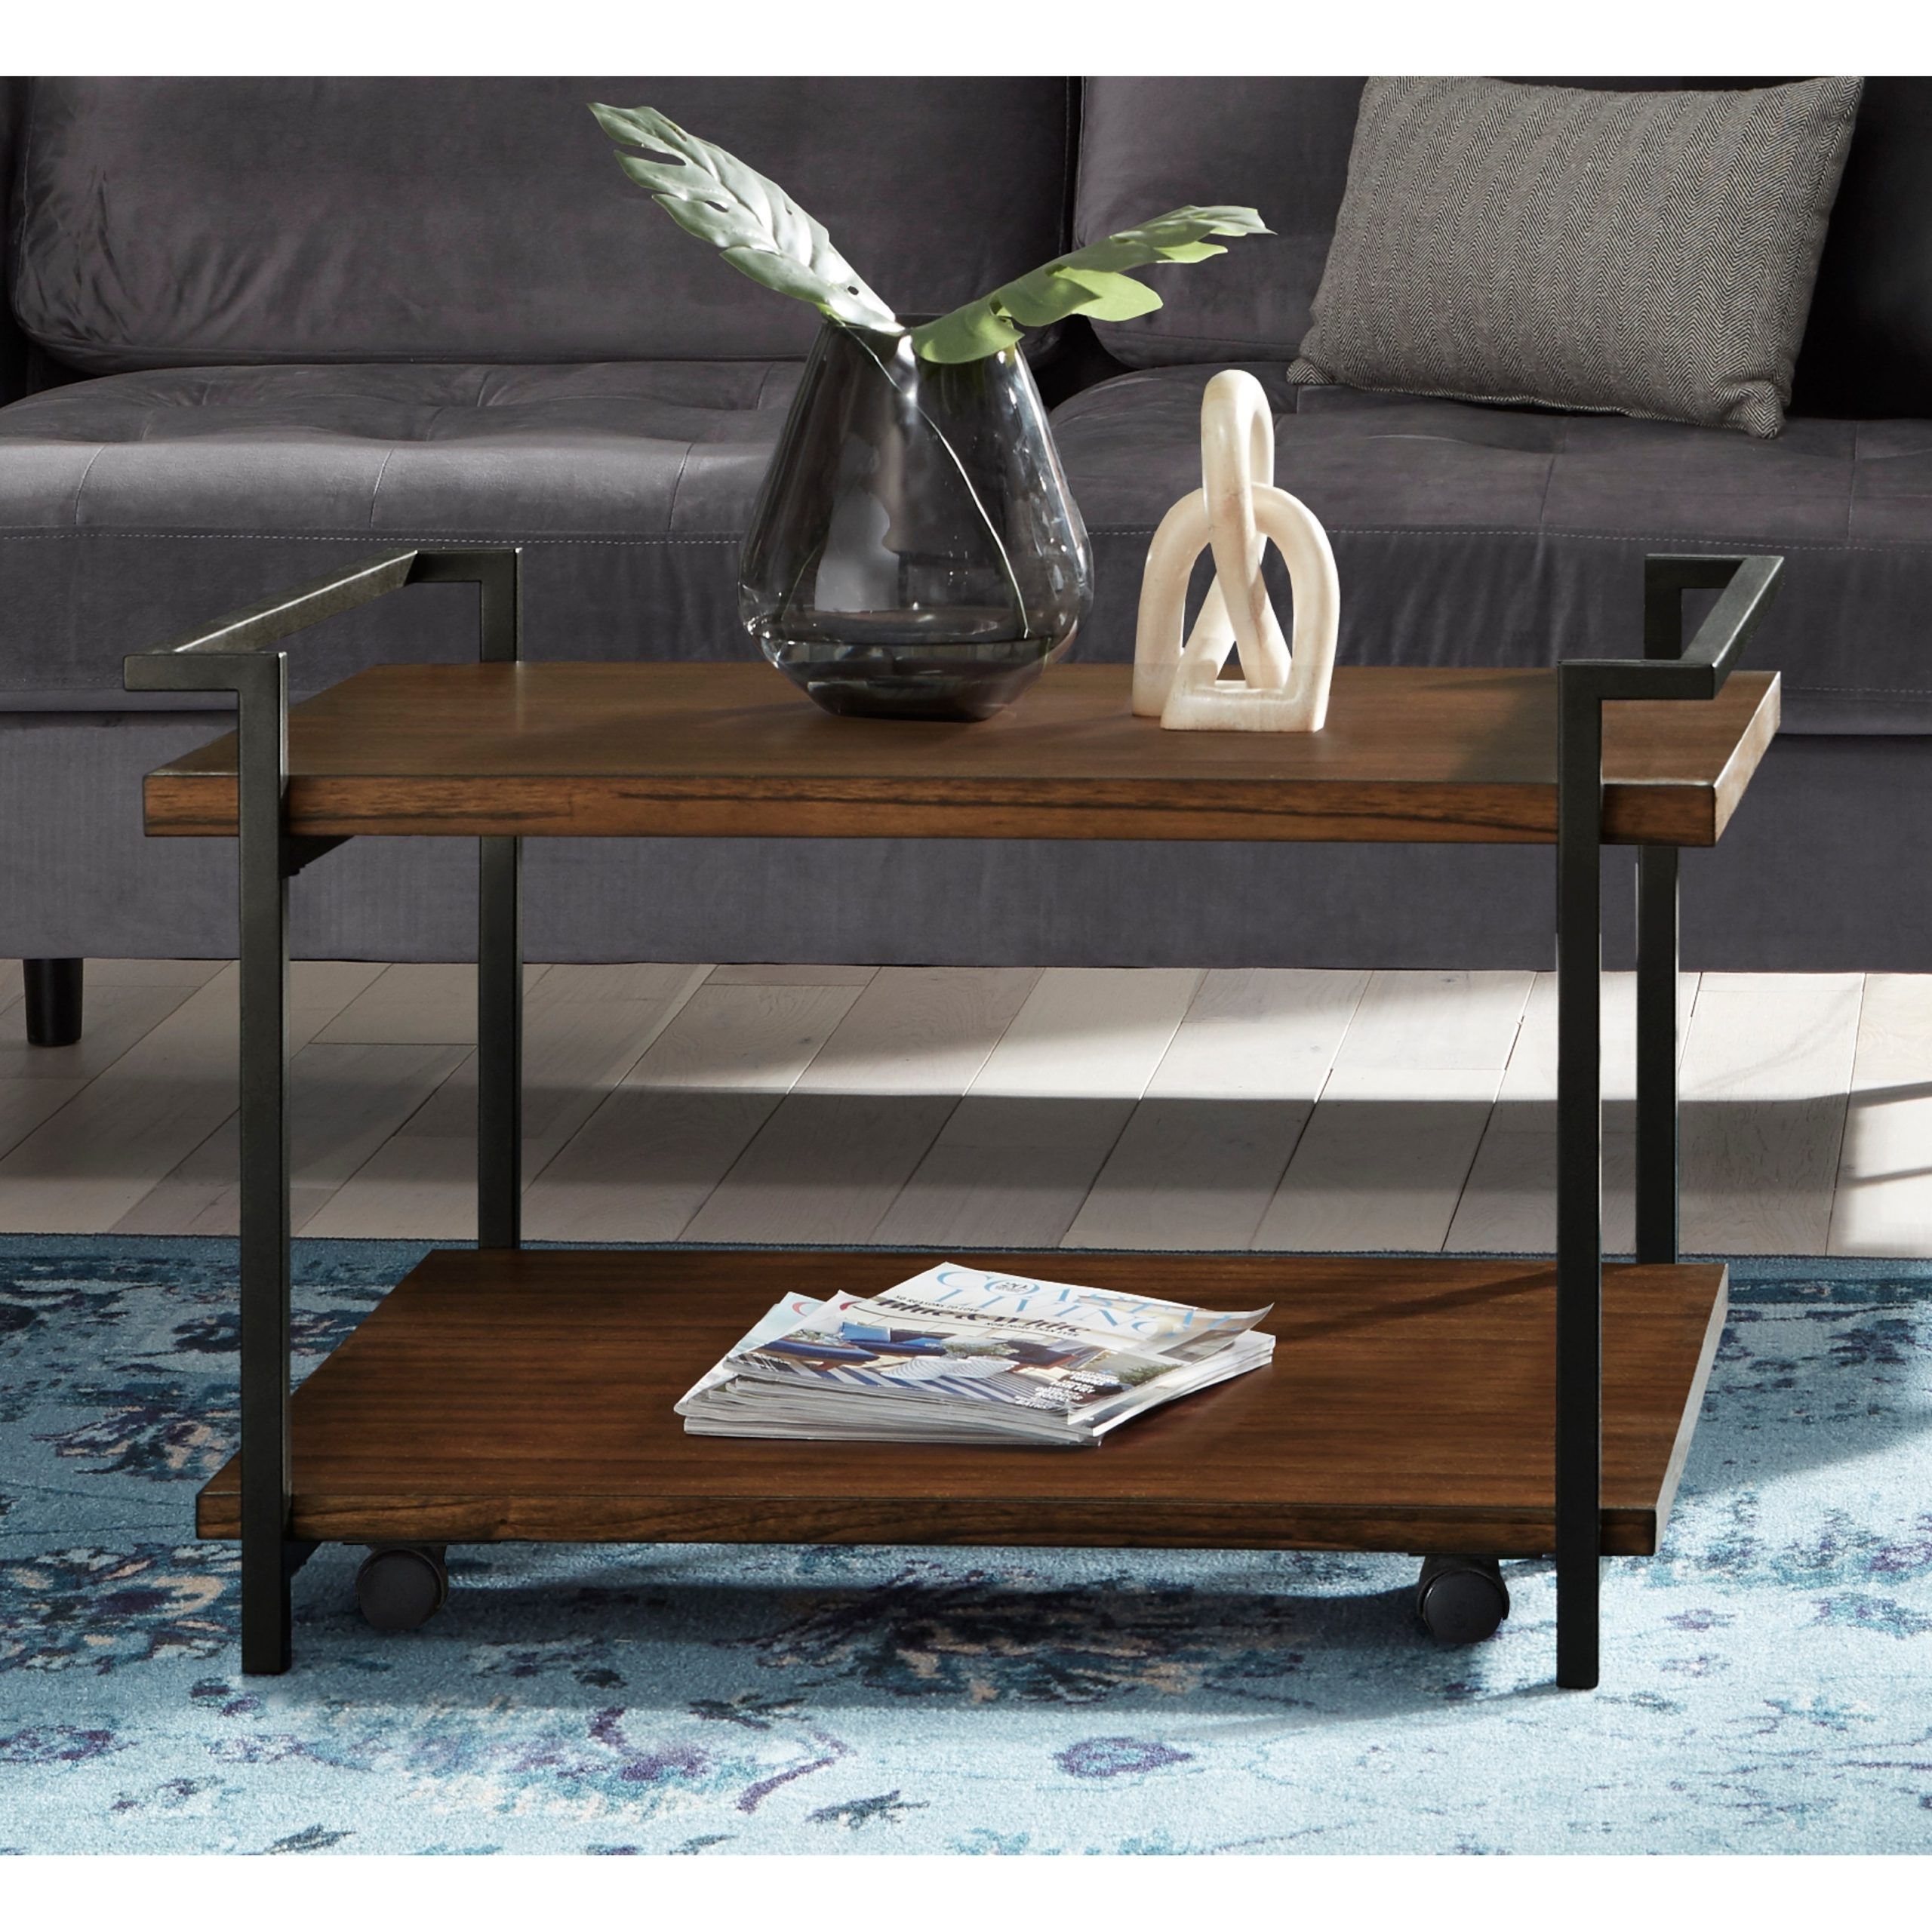 Natural Solid Wood And Metal Coffee Table With Shelves – Bed Bath & Beyond  – 32046820 Throughout Coffee Tables With Casters (View 12 of 15)